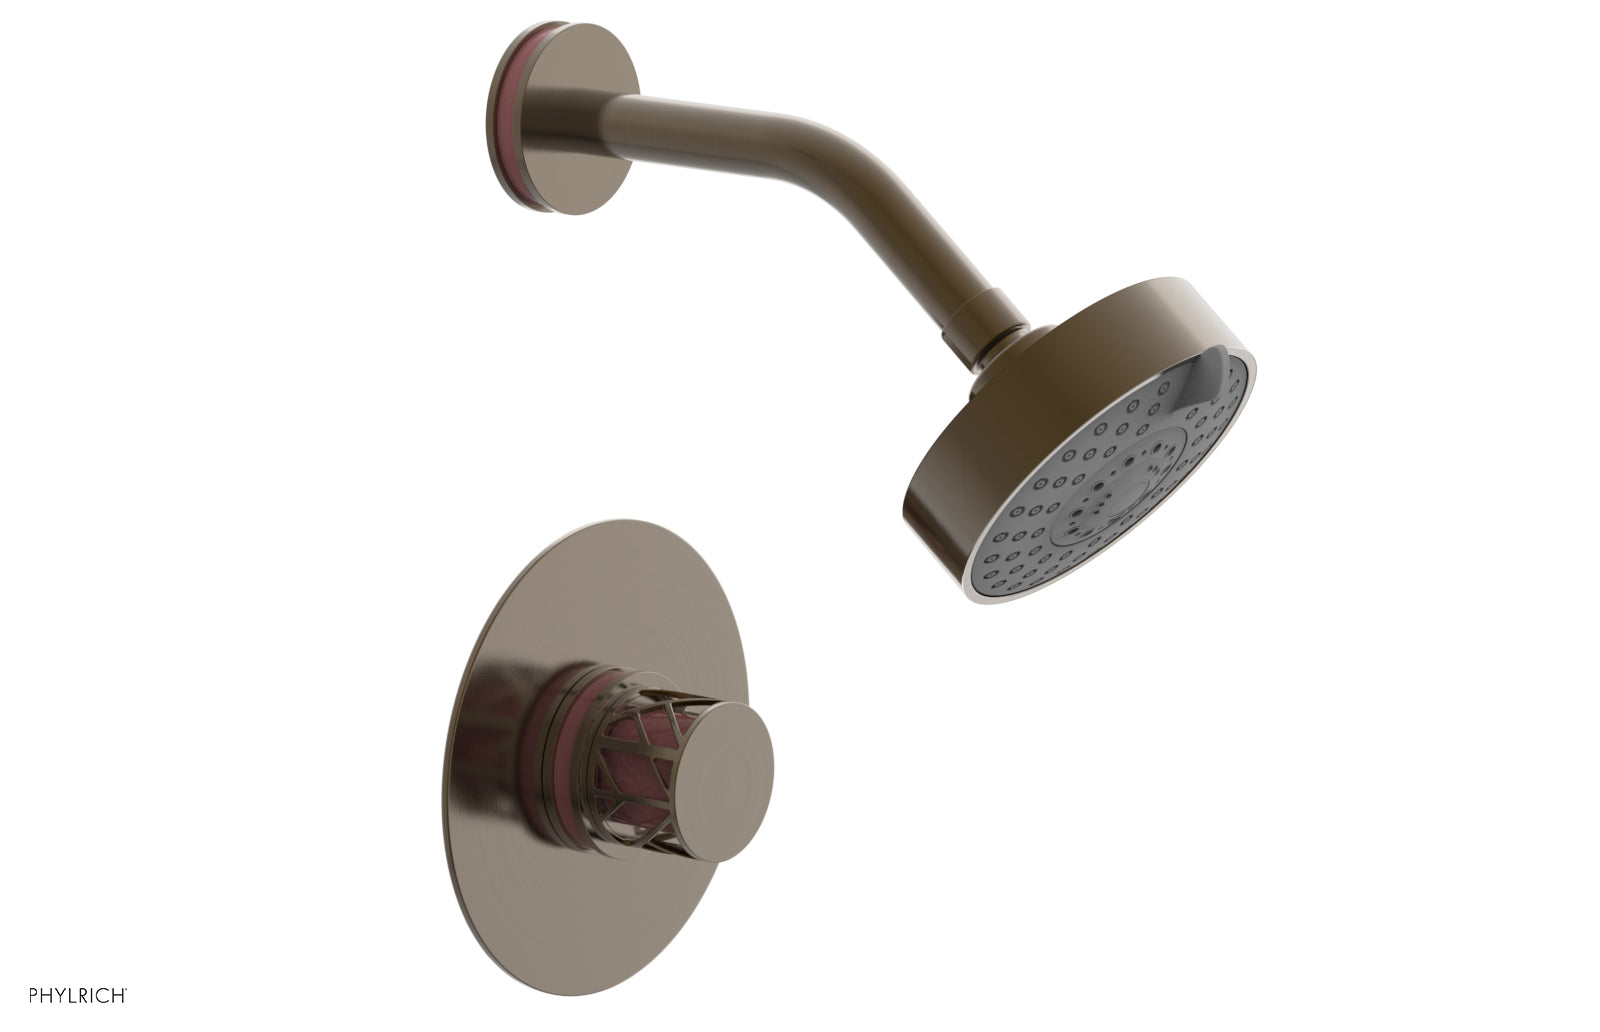 Phylrich JOLIE Pressure Balance Shower Set - Round Handle with "Pink" Accents